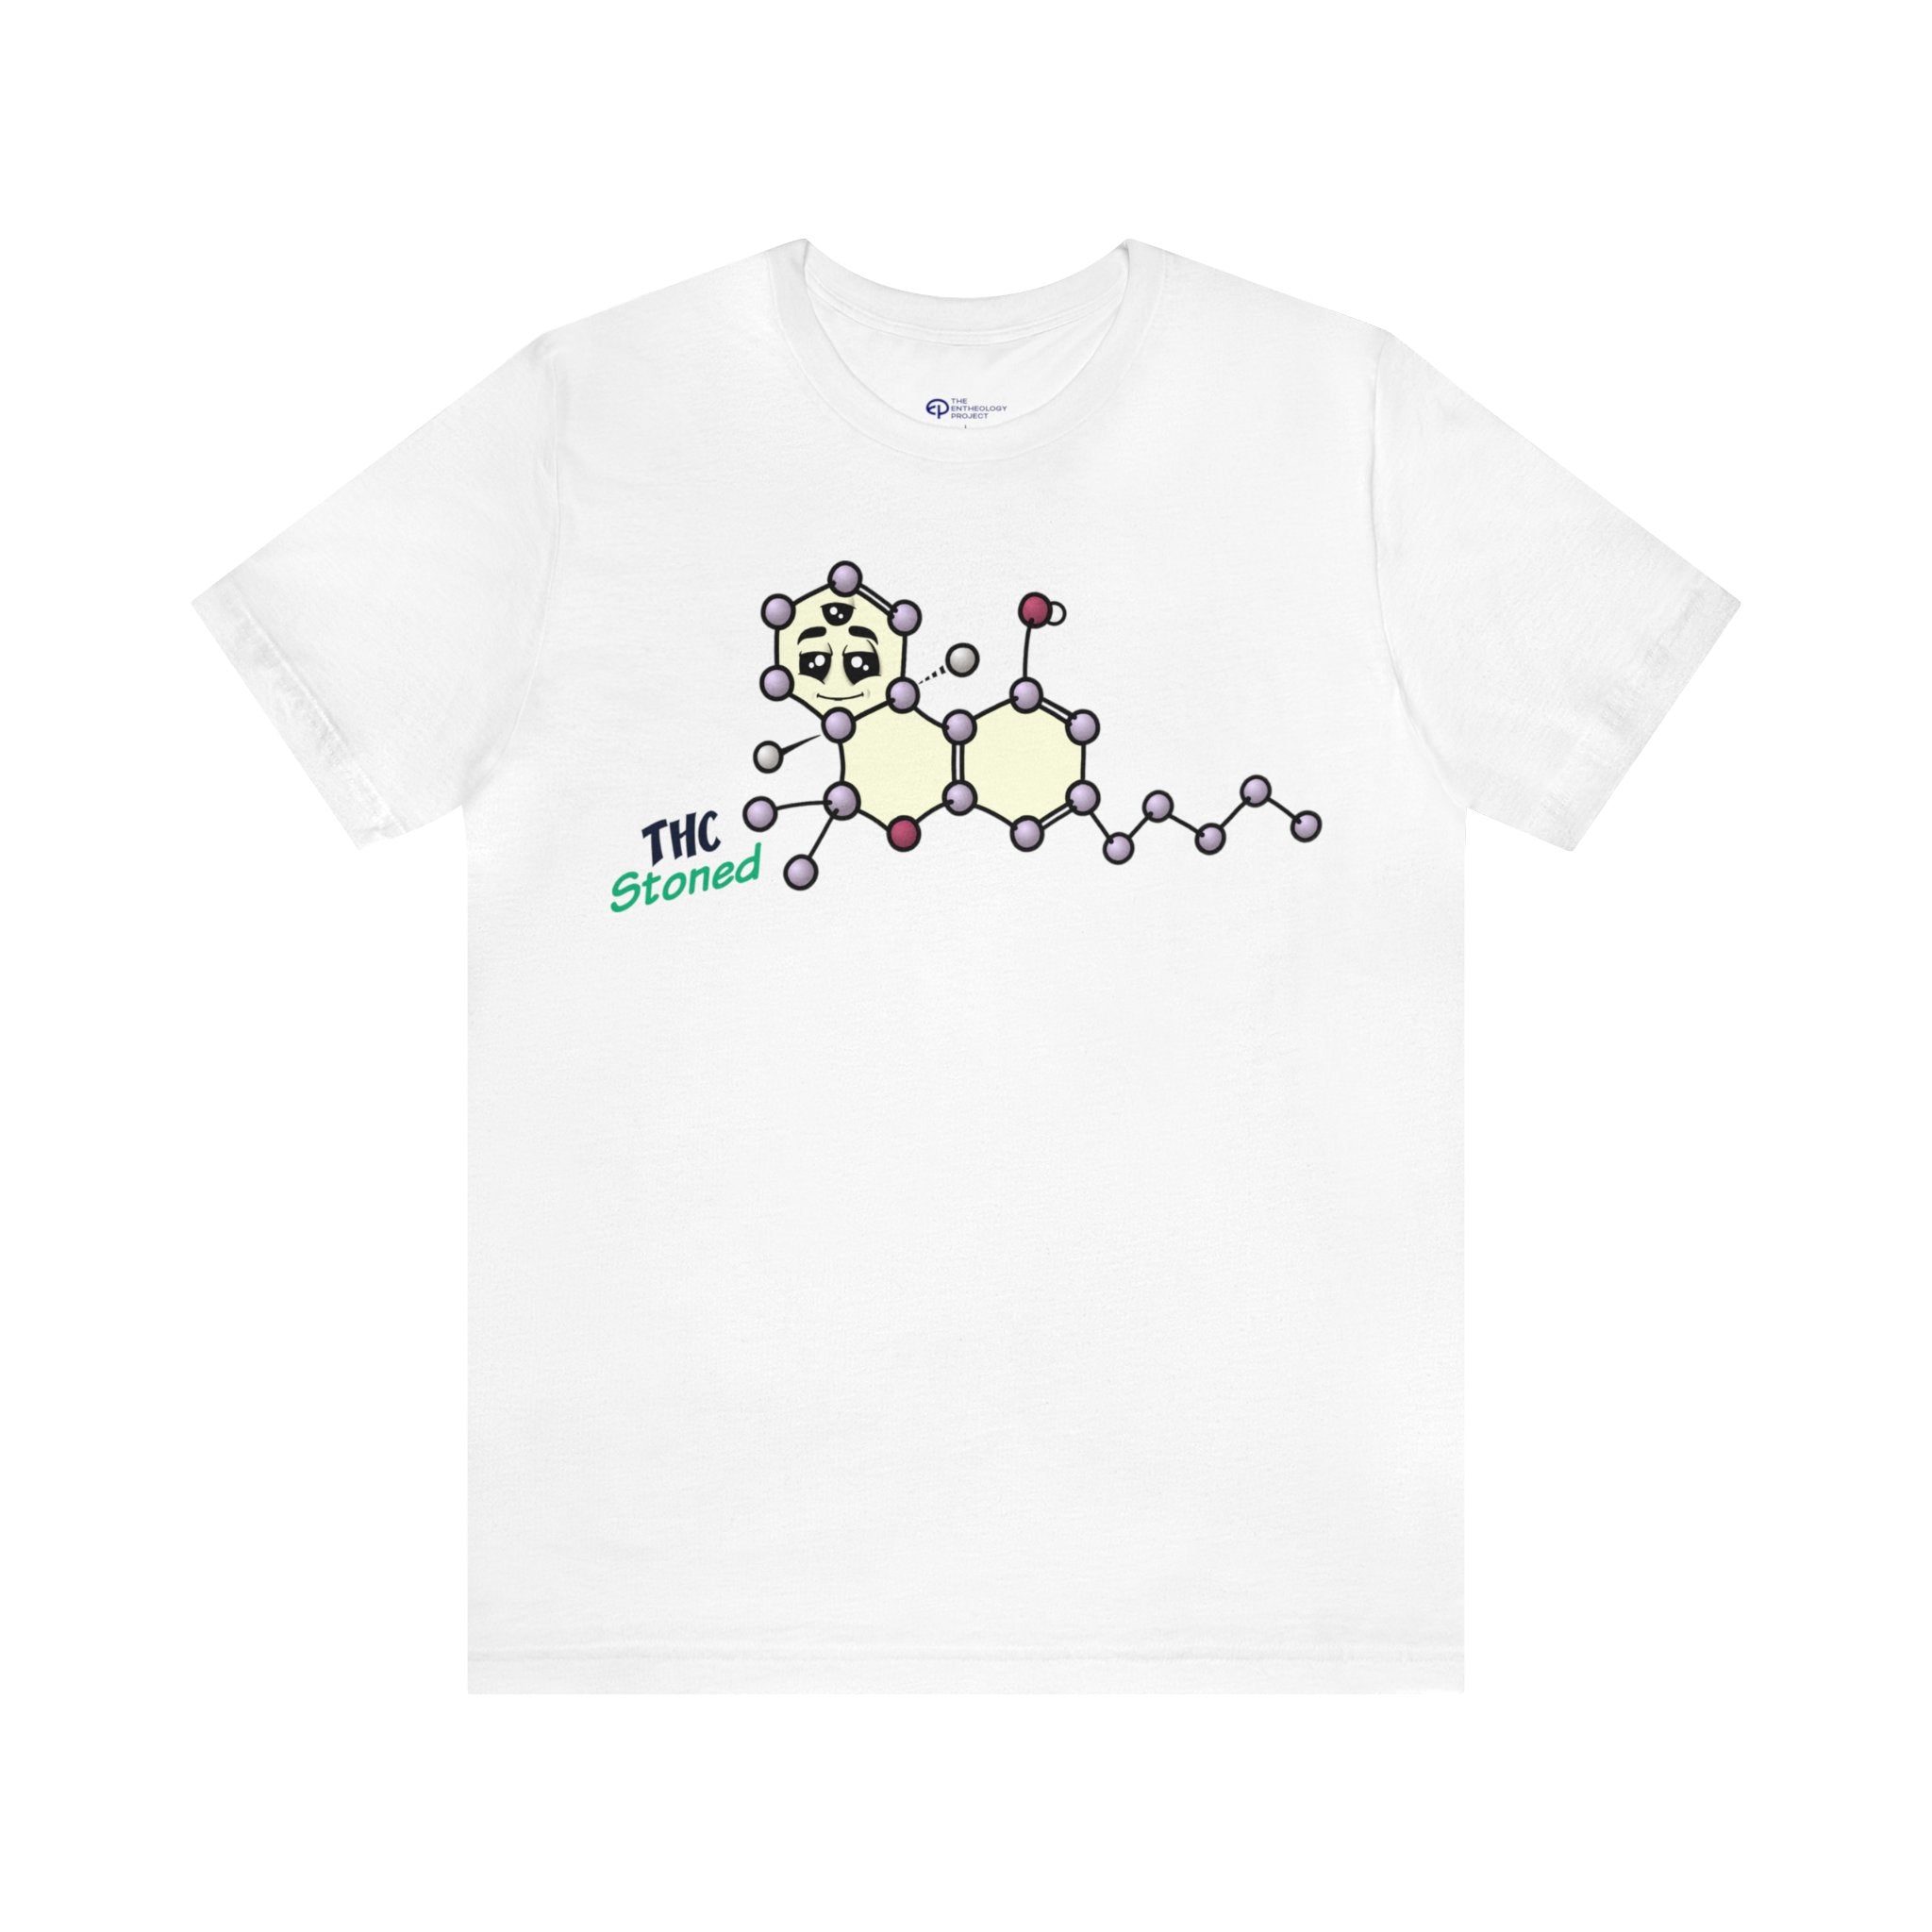 Stoned THC Jersey Short Sleeve Tee: Sensational Molecules Collection